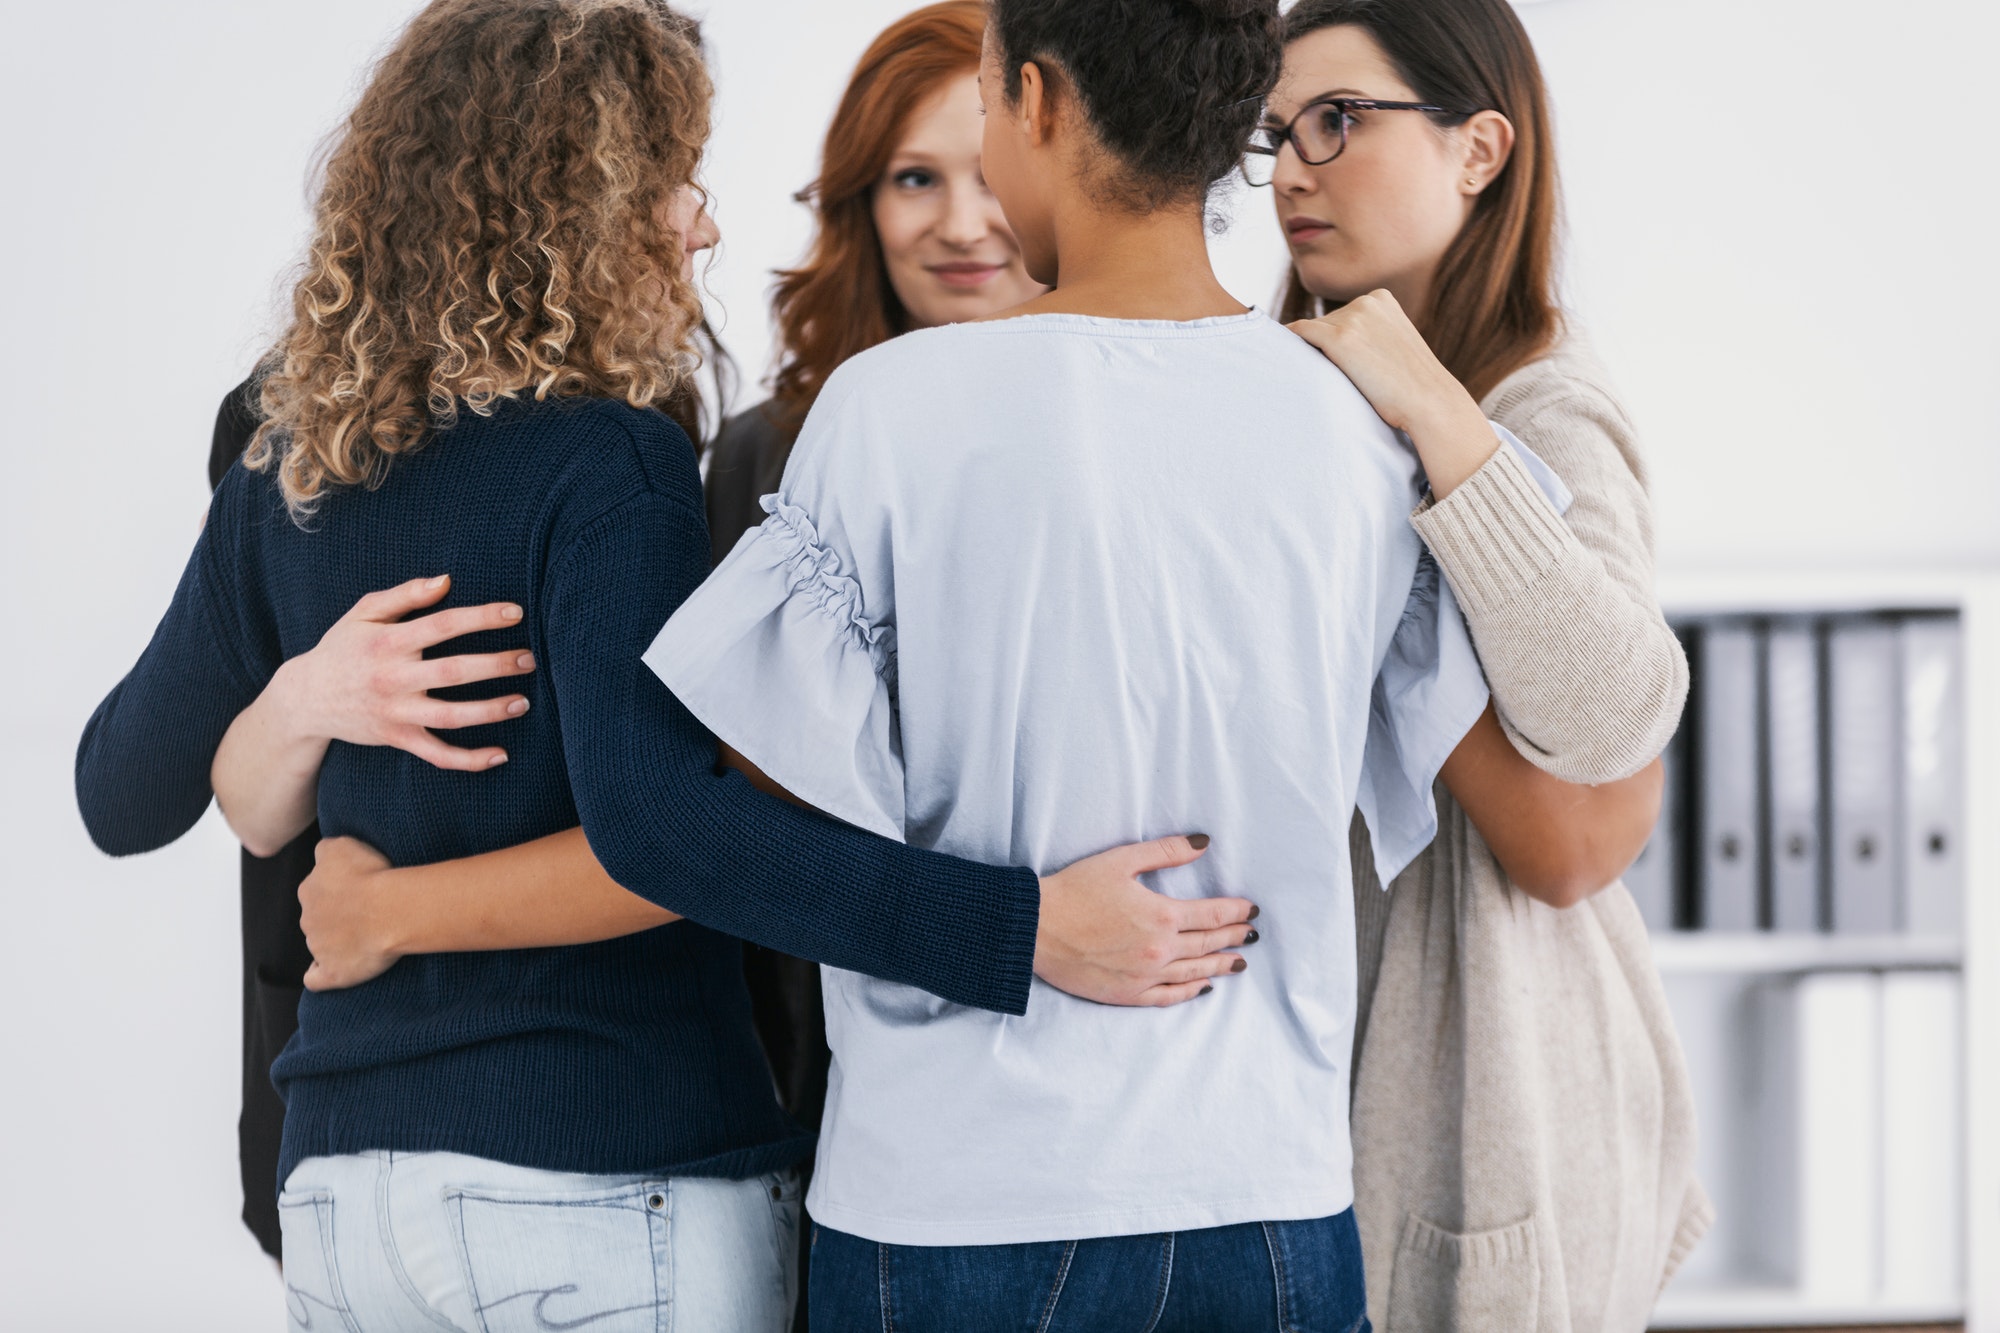 Women with issues supporting together during group therapy